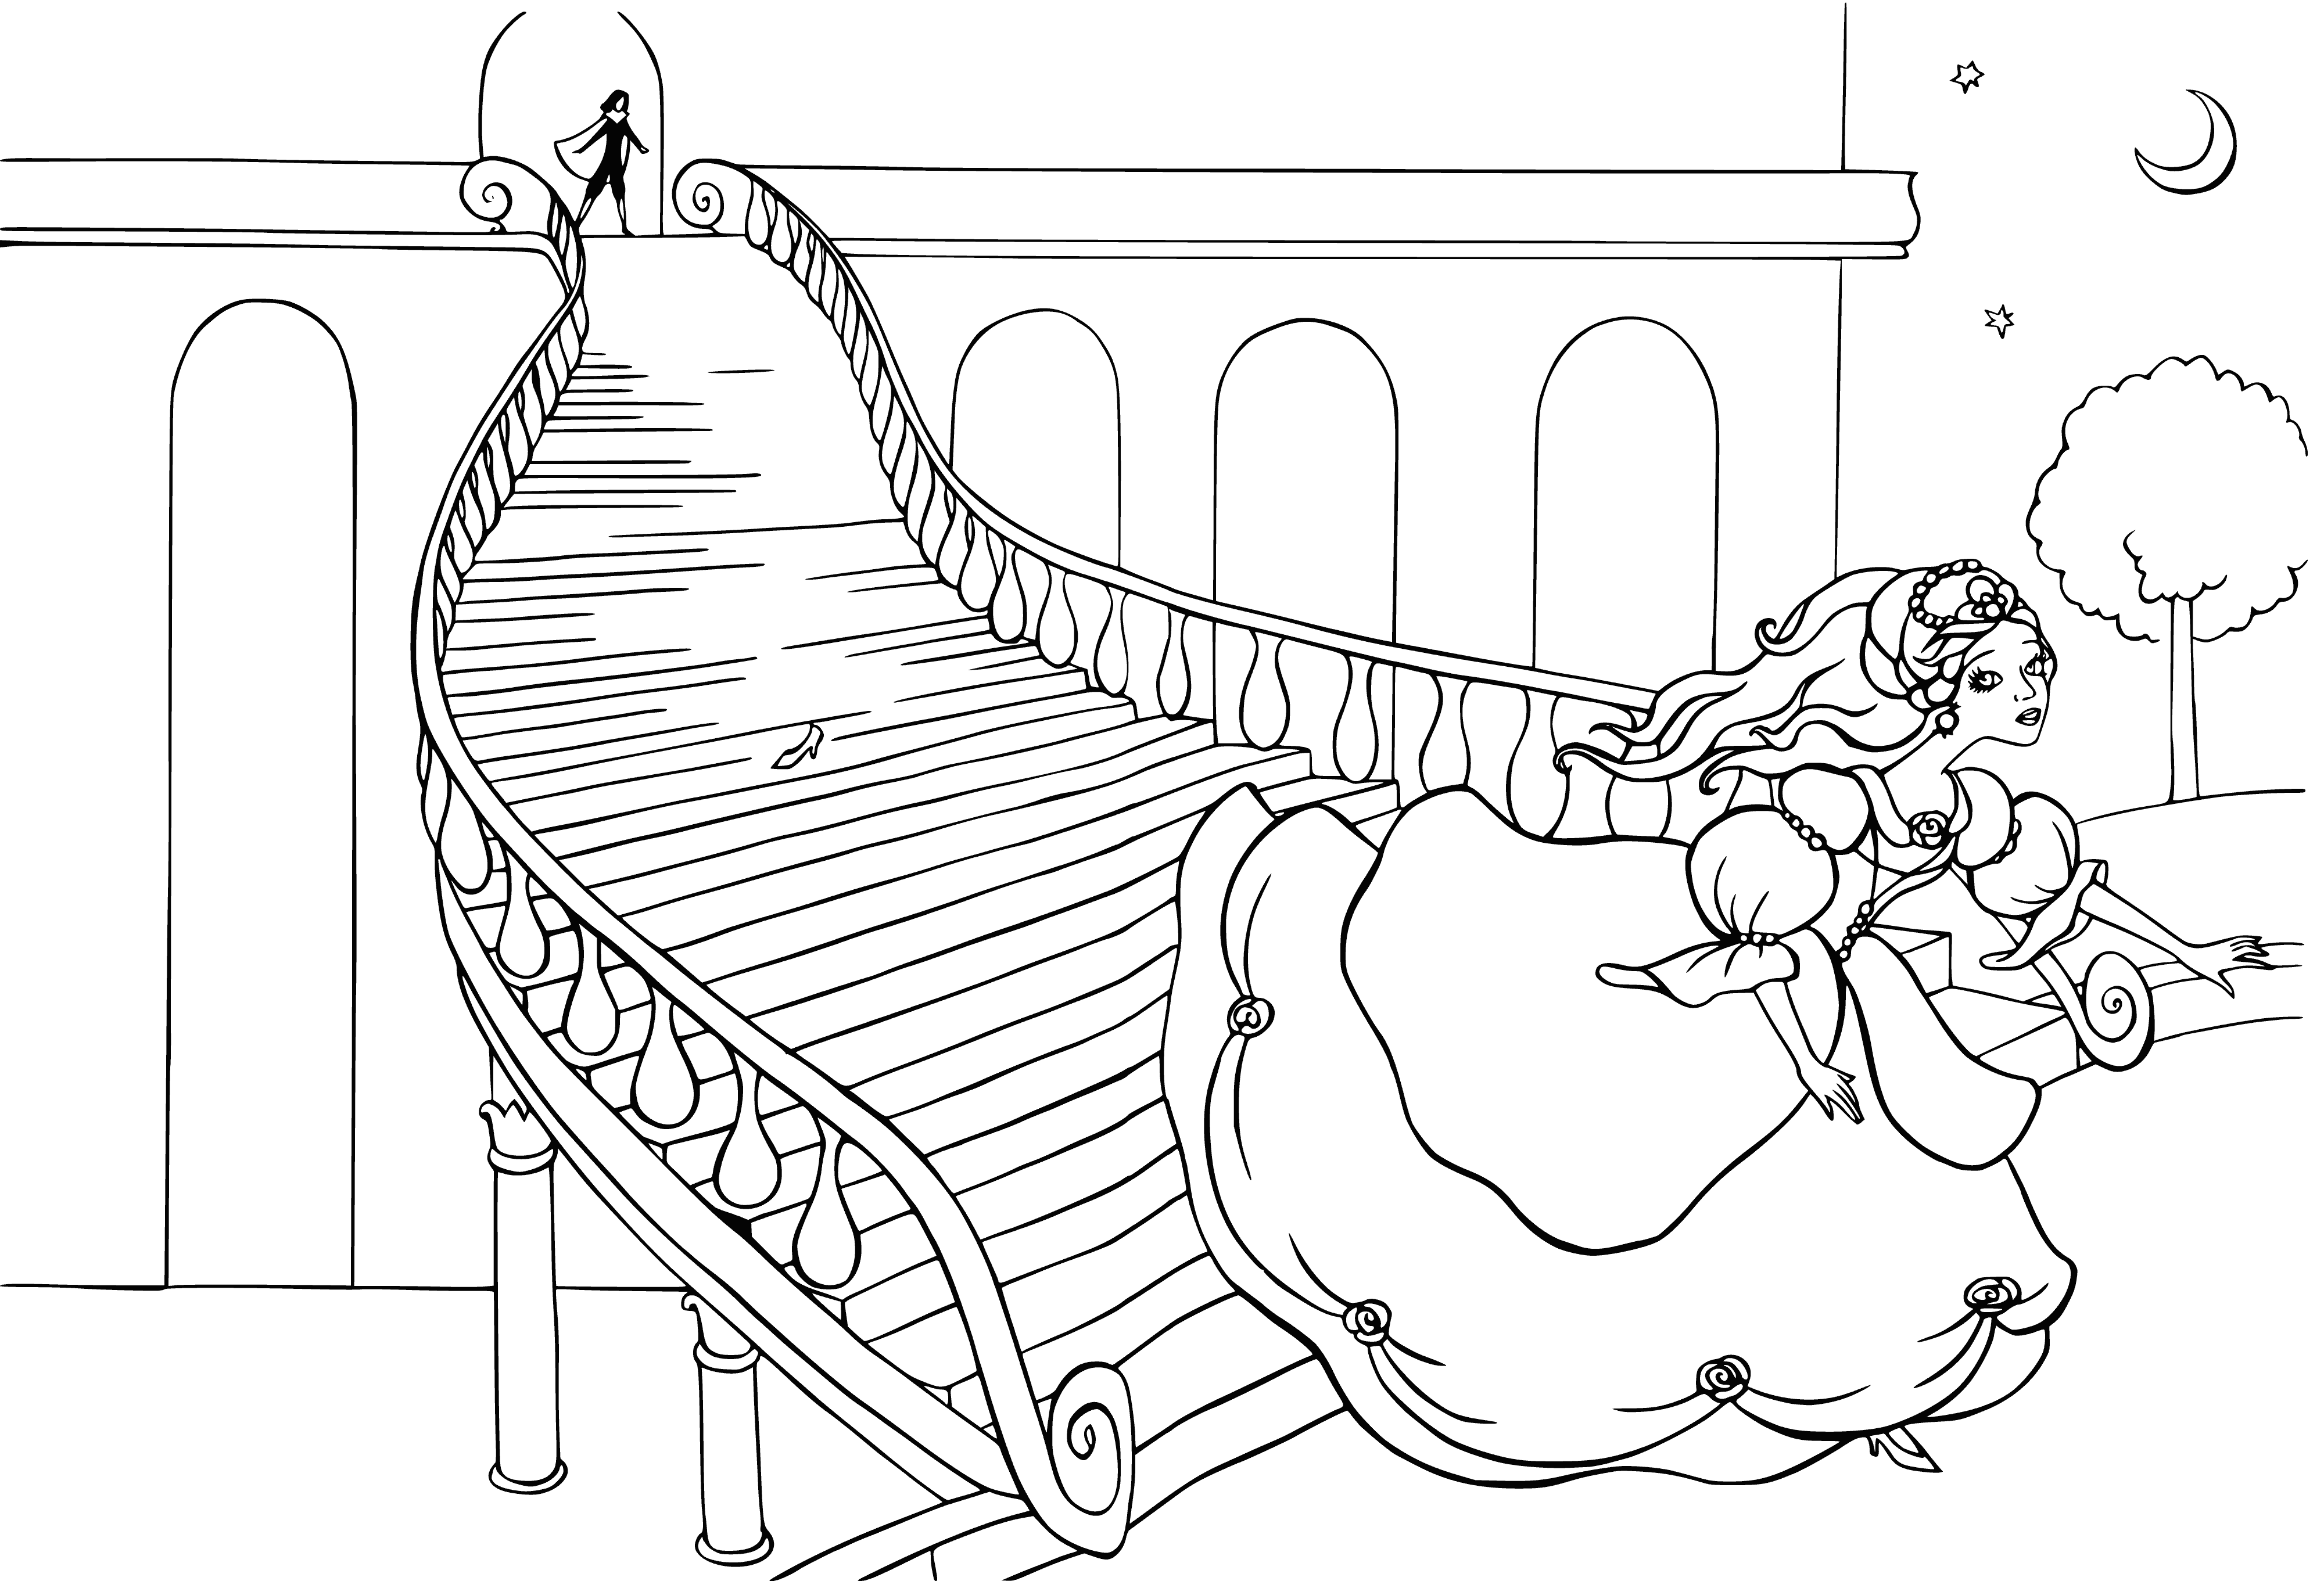 coloring page: Fairy-tale wedding of Prince & Cinderella. Guests applaud & Fairy Godmother smiles; happy couple weds in Fairy Kingdom.